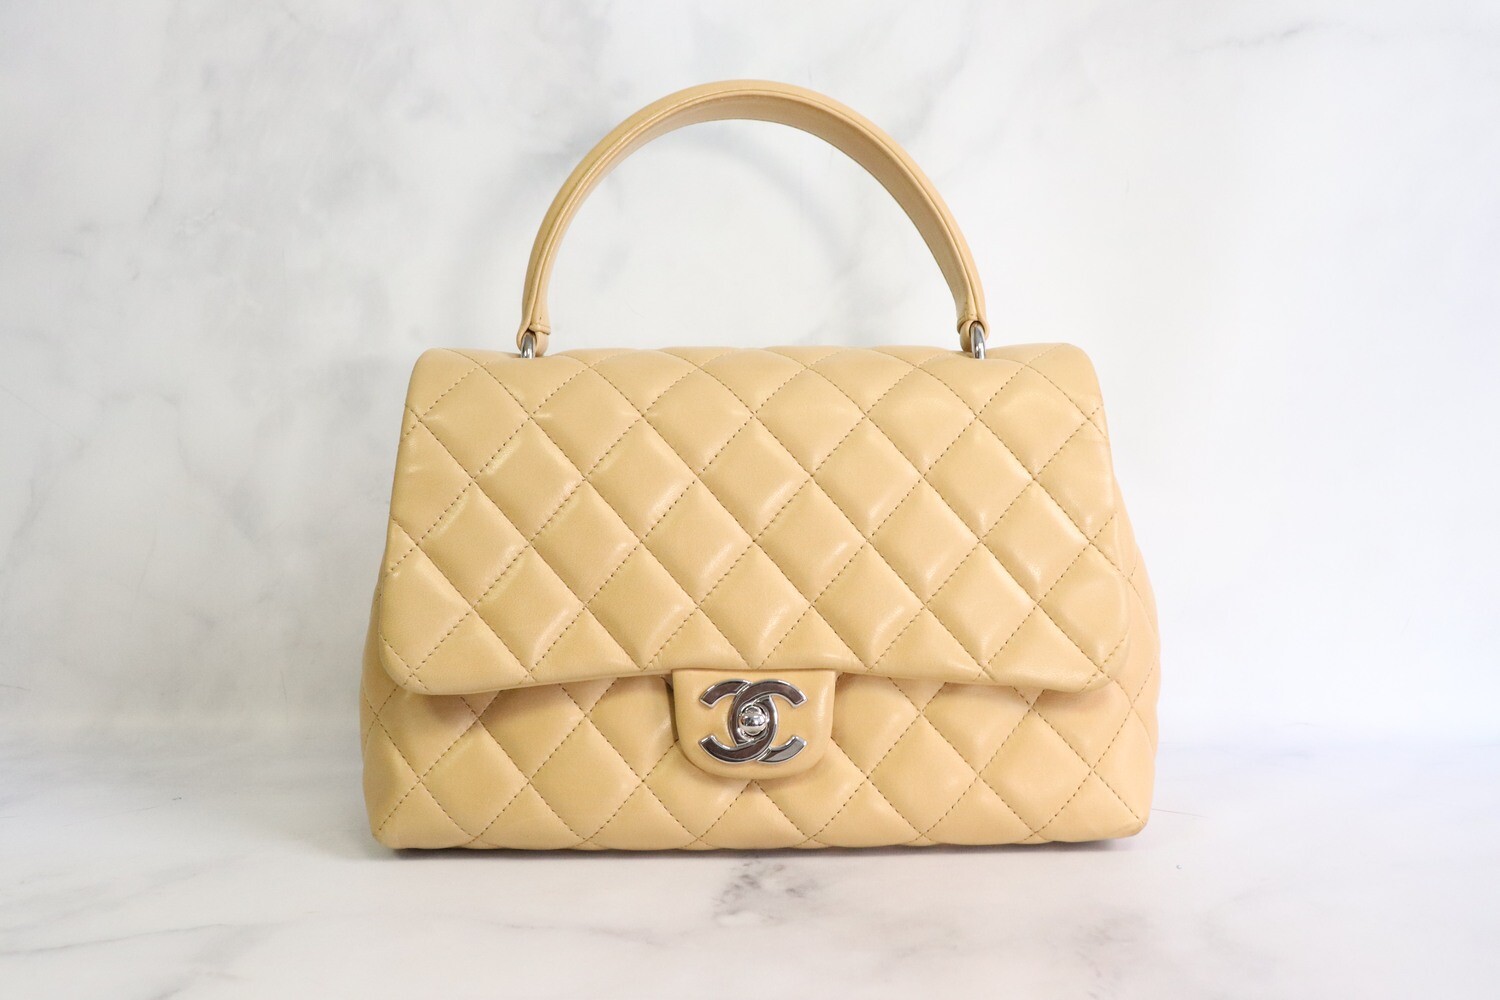 Chanel Vintage Kelly Top Handle, Beige Lambskin Leather, Gold Hardware,  Preowned in Box